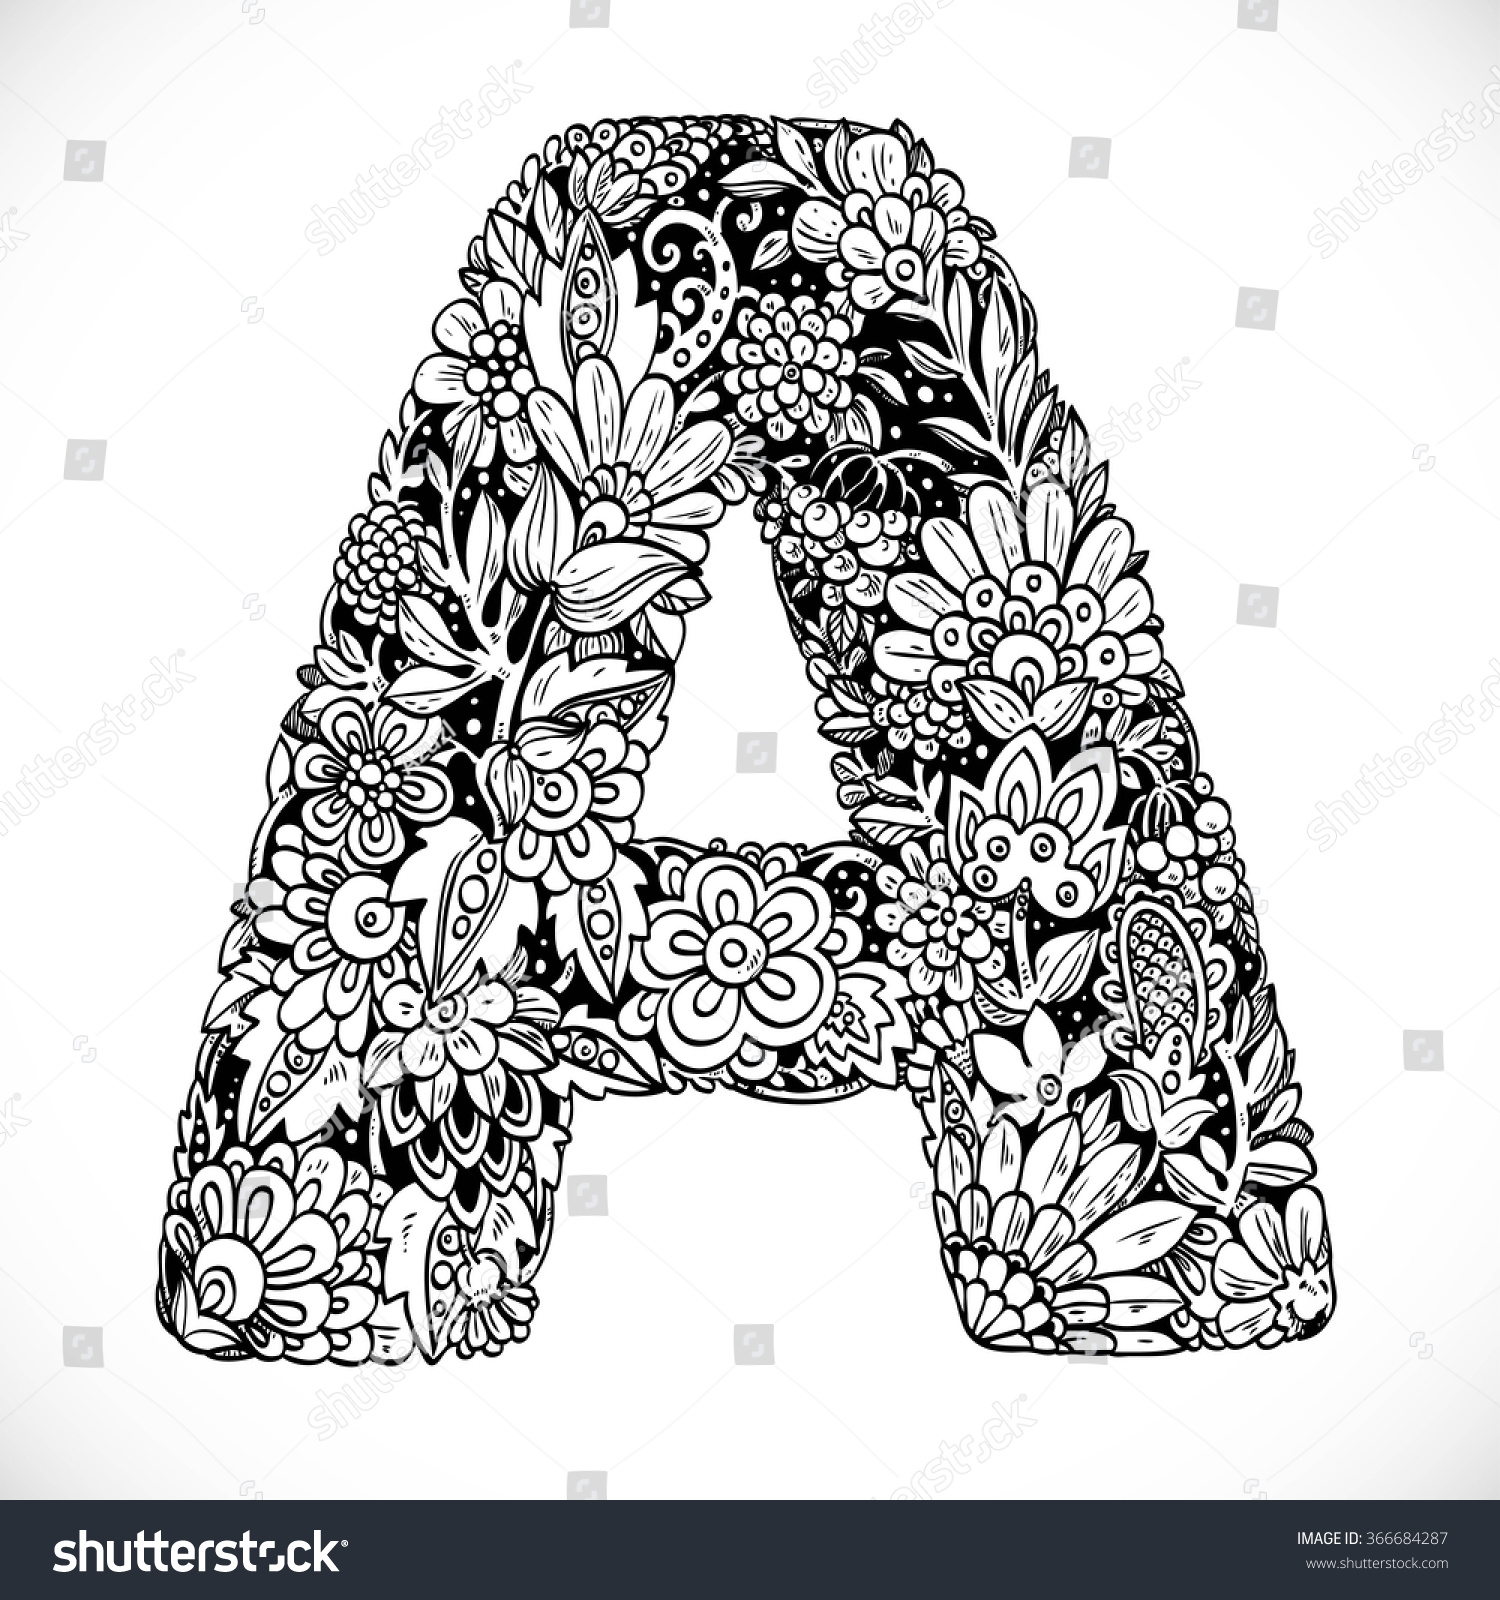 Doodles Font From Ornamental Flowers - Letter A. Black And White Stock ...